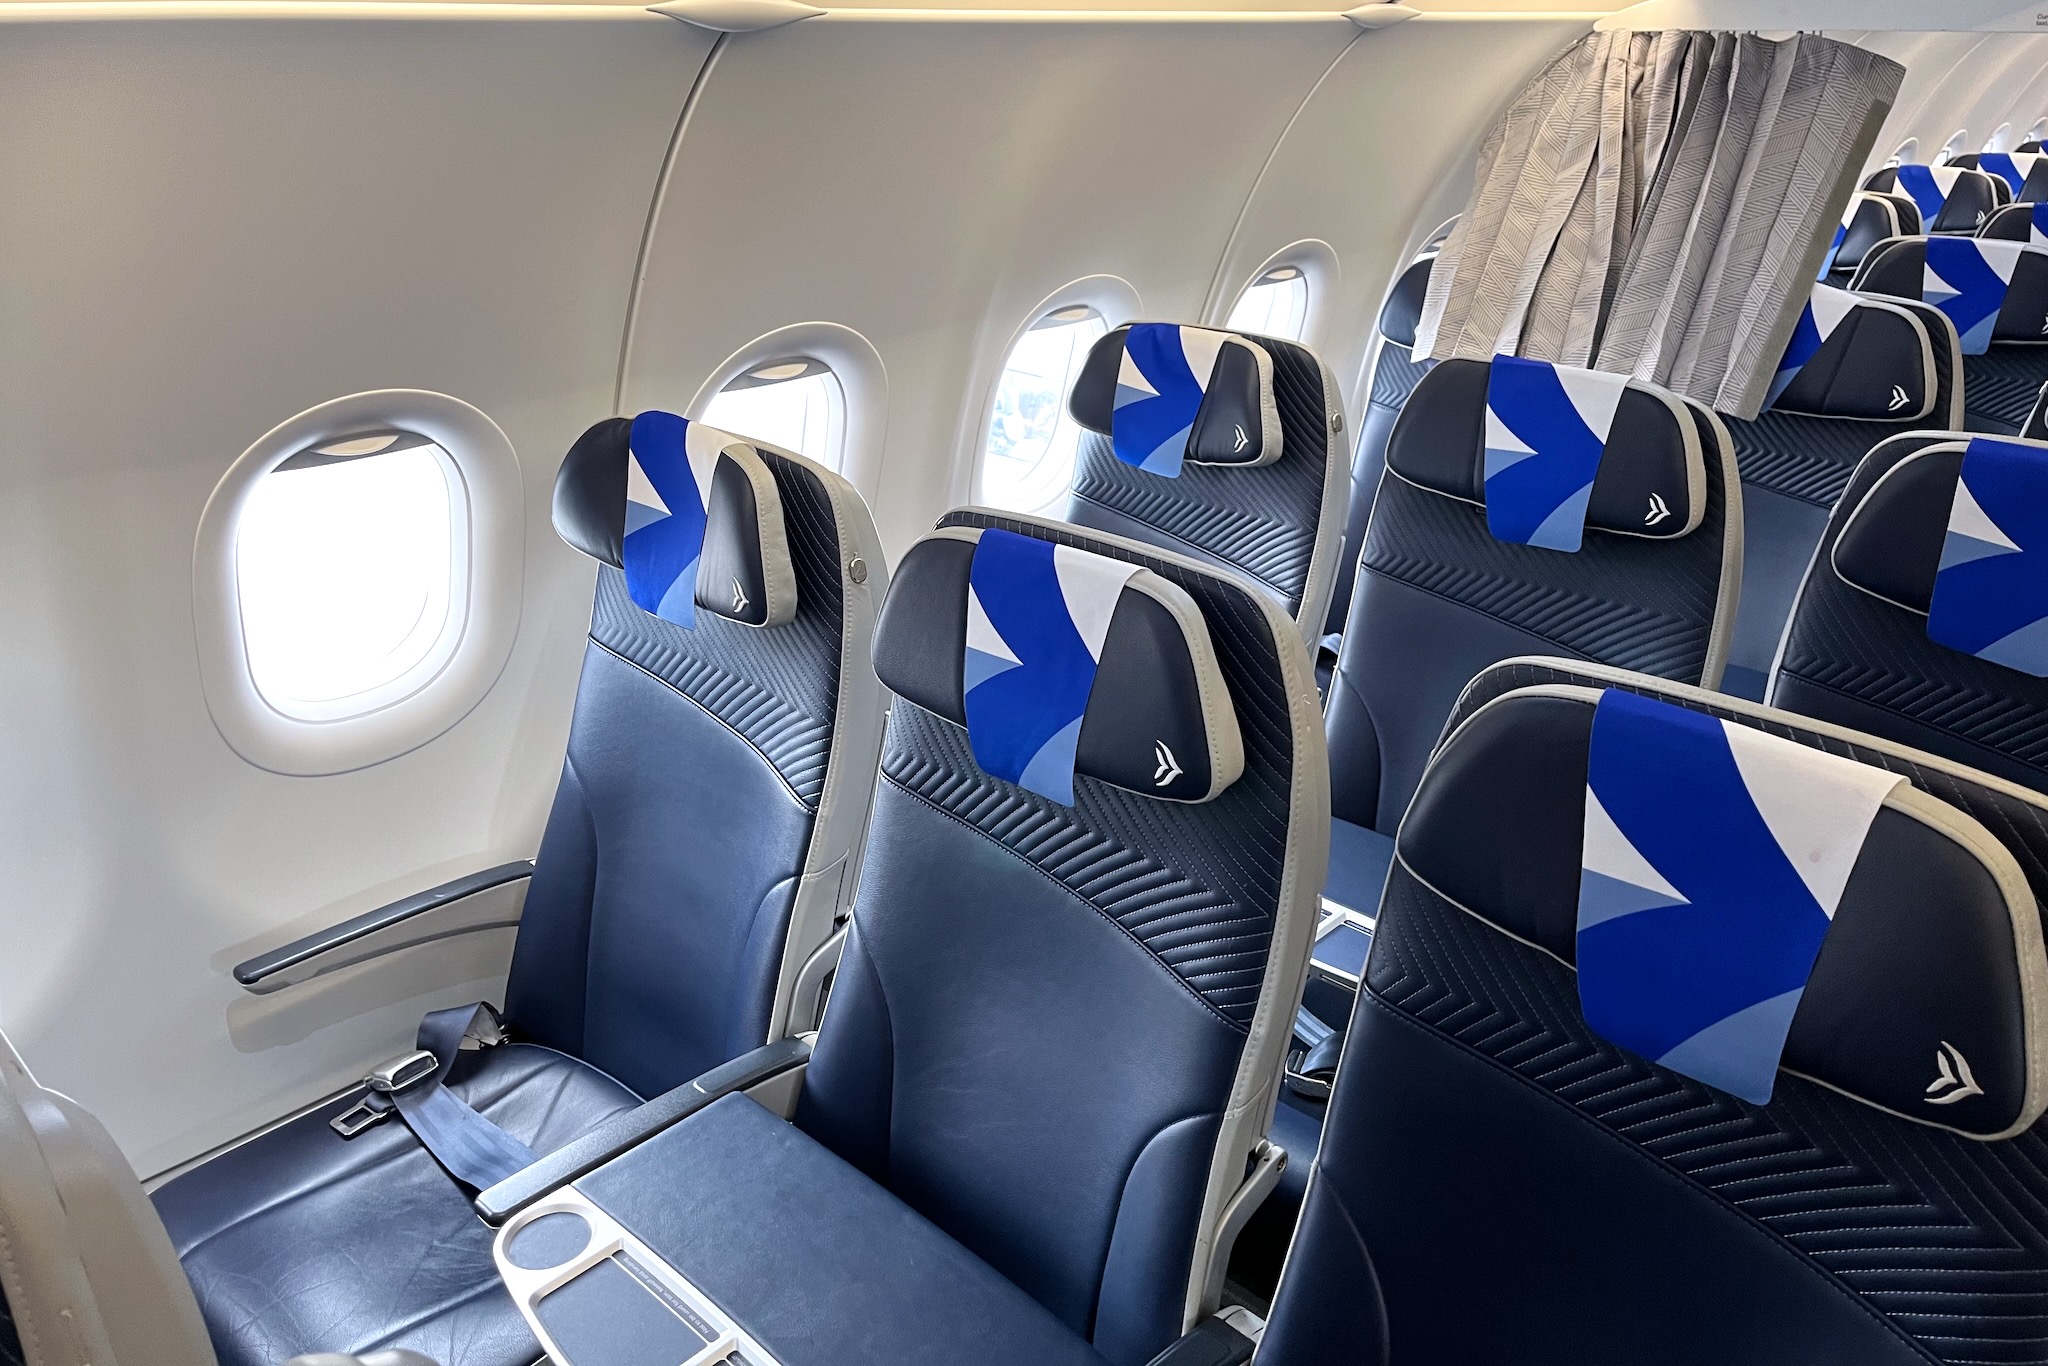 Read more about the article Aegean Airlines Business Class in der Airbus A321neo nach Berlin